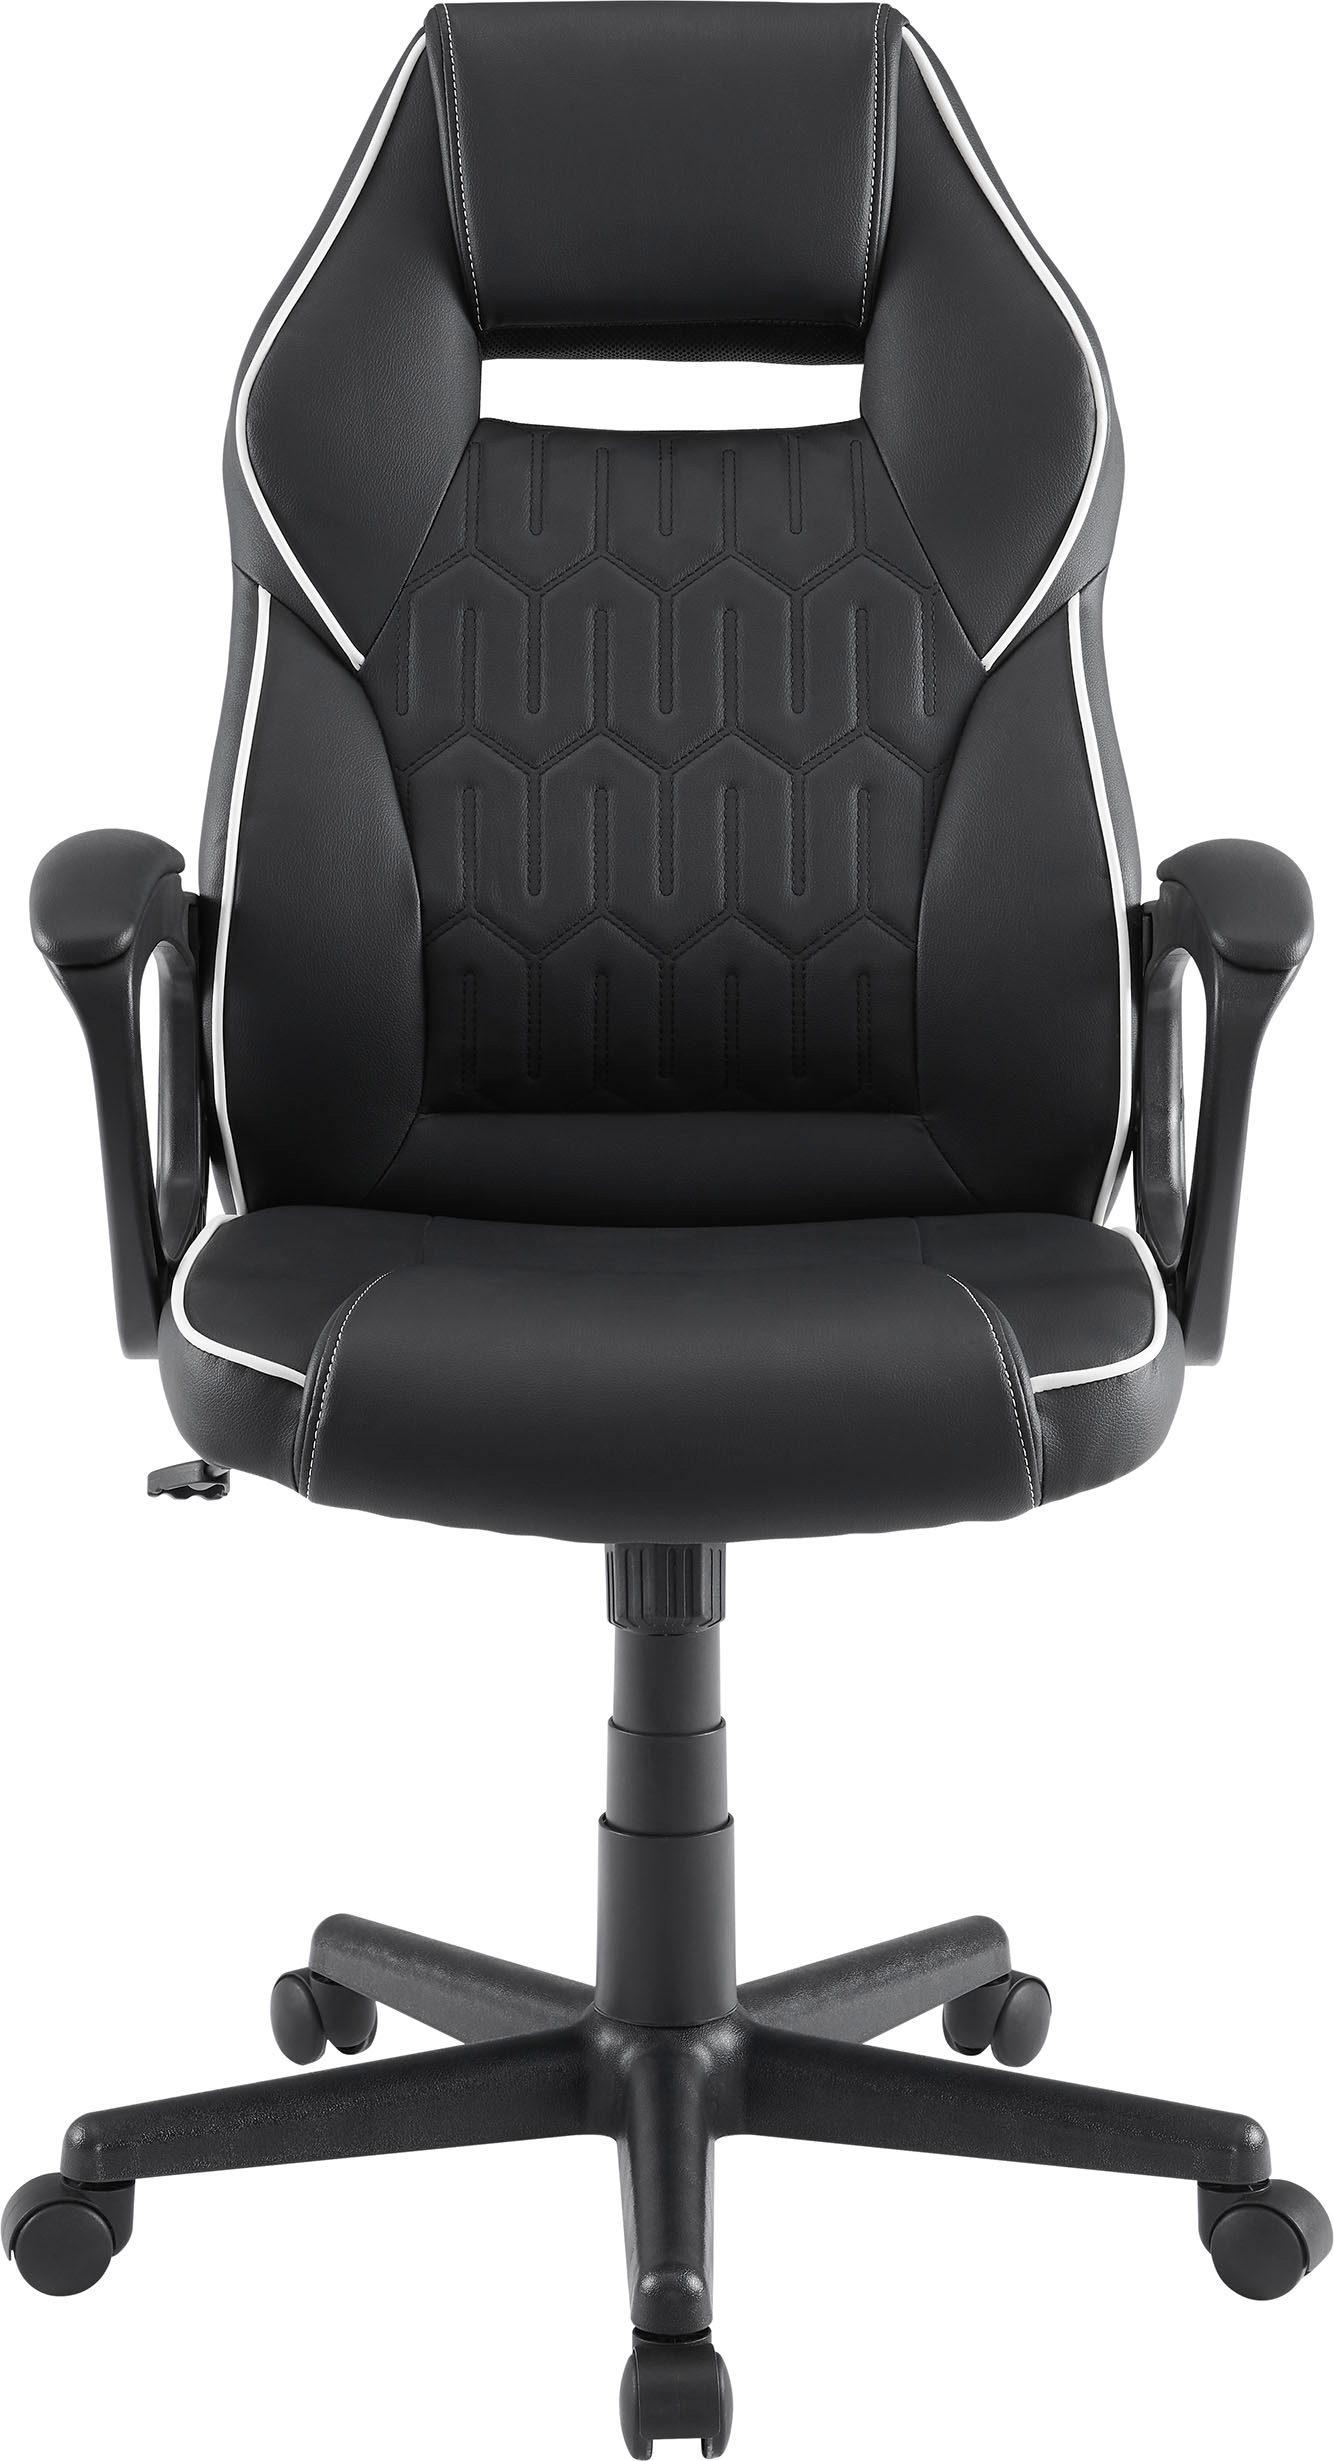 Left View: Arozzi - Milano Gaming/Office Chair - Black